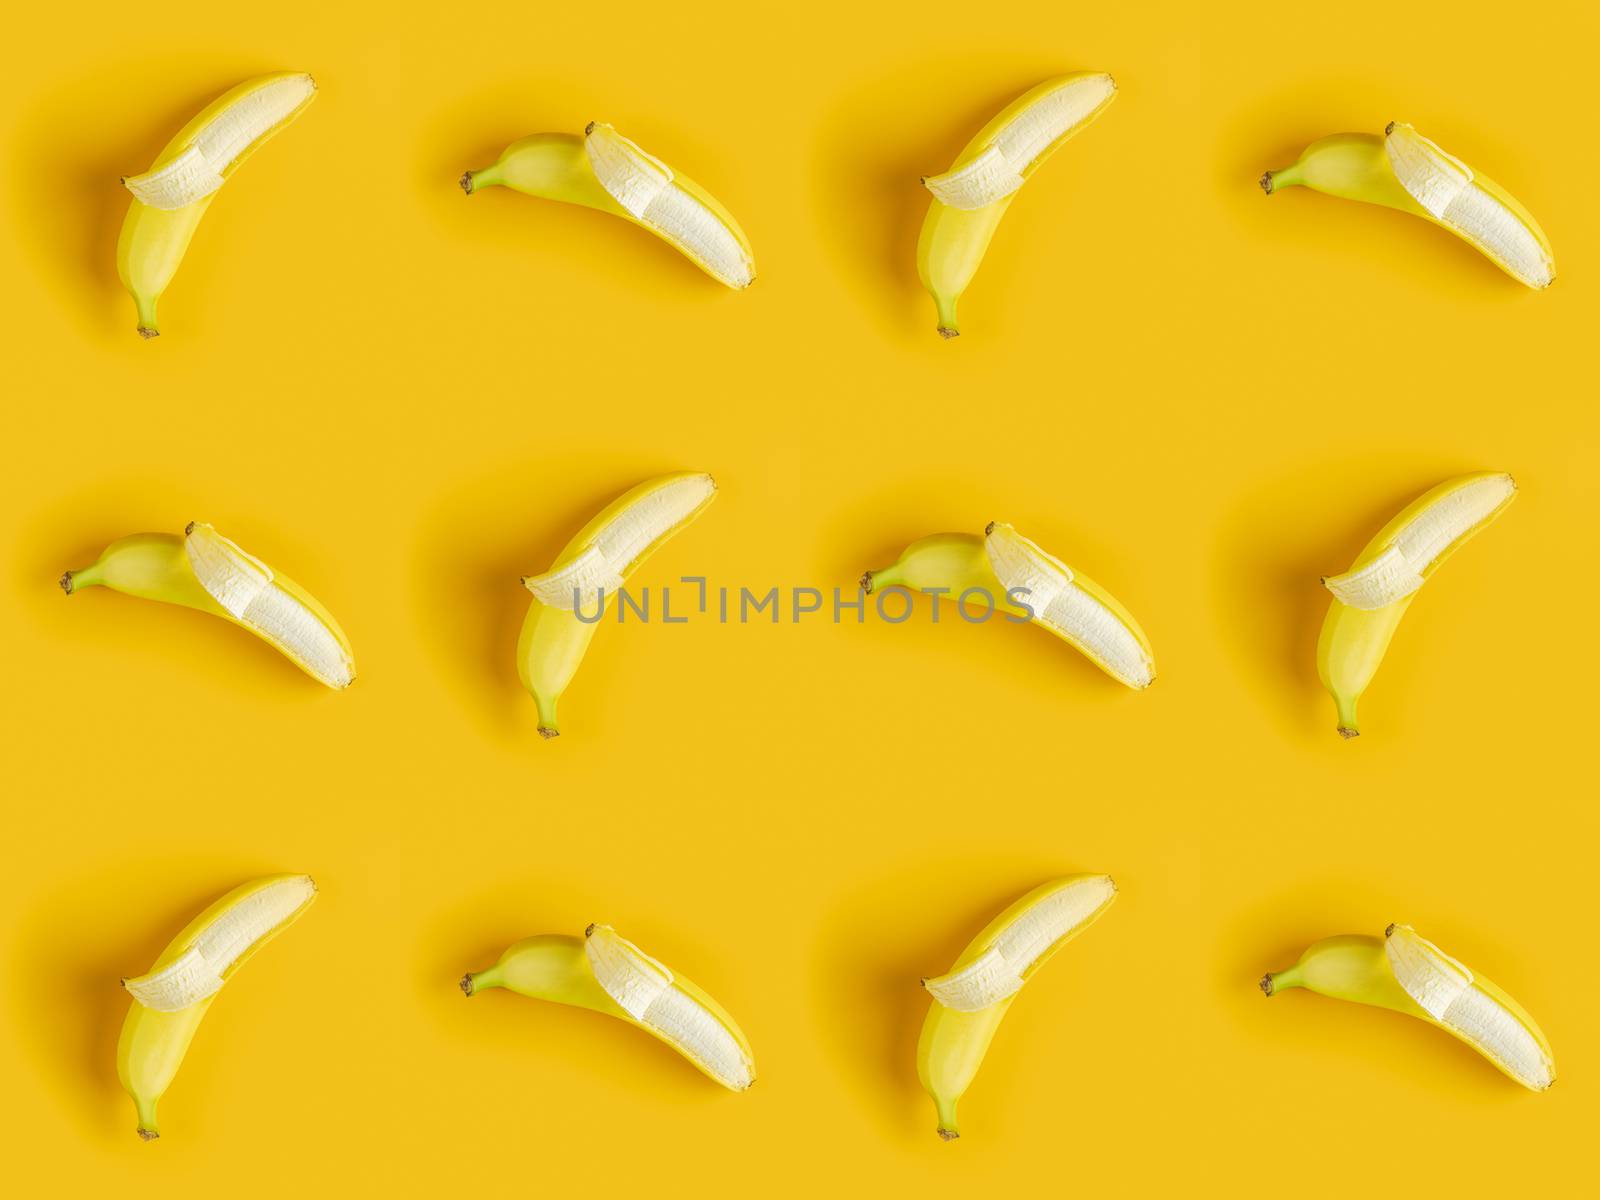 Tropical abstract background. Juicy ripe banana pattern on yello by ArtSvitlyna